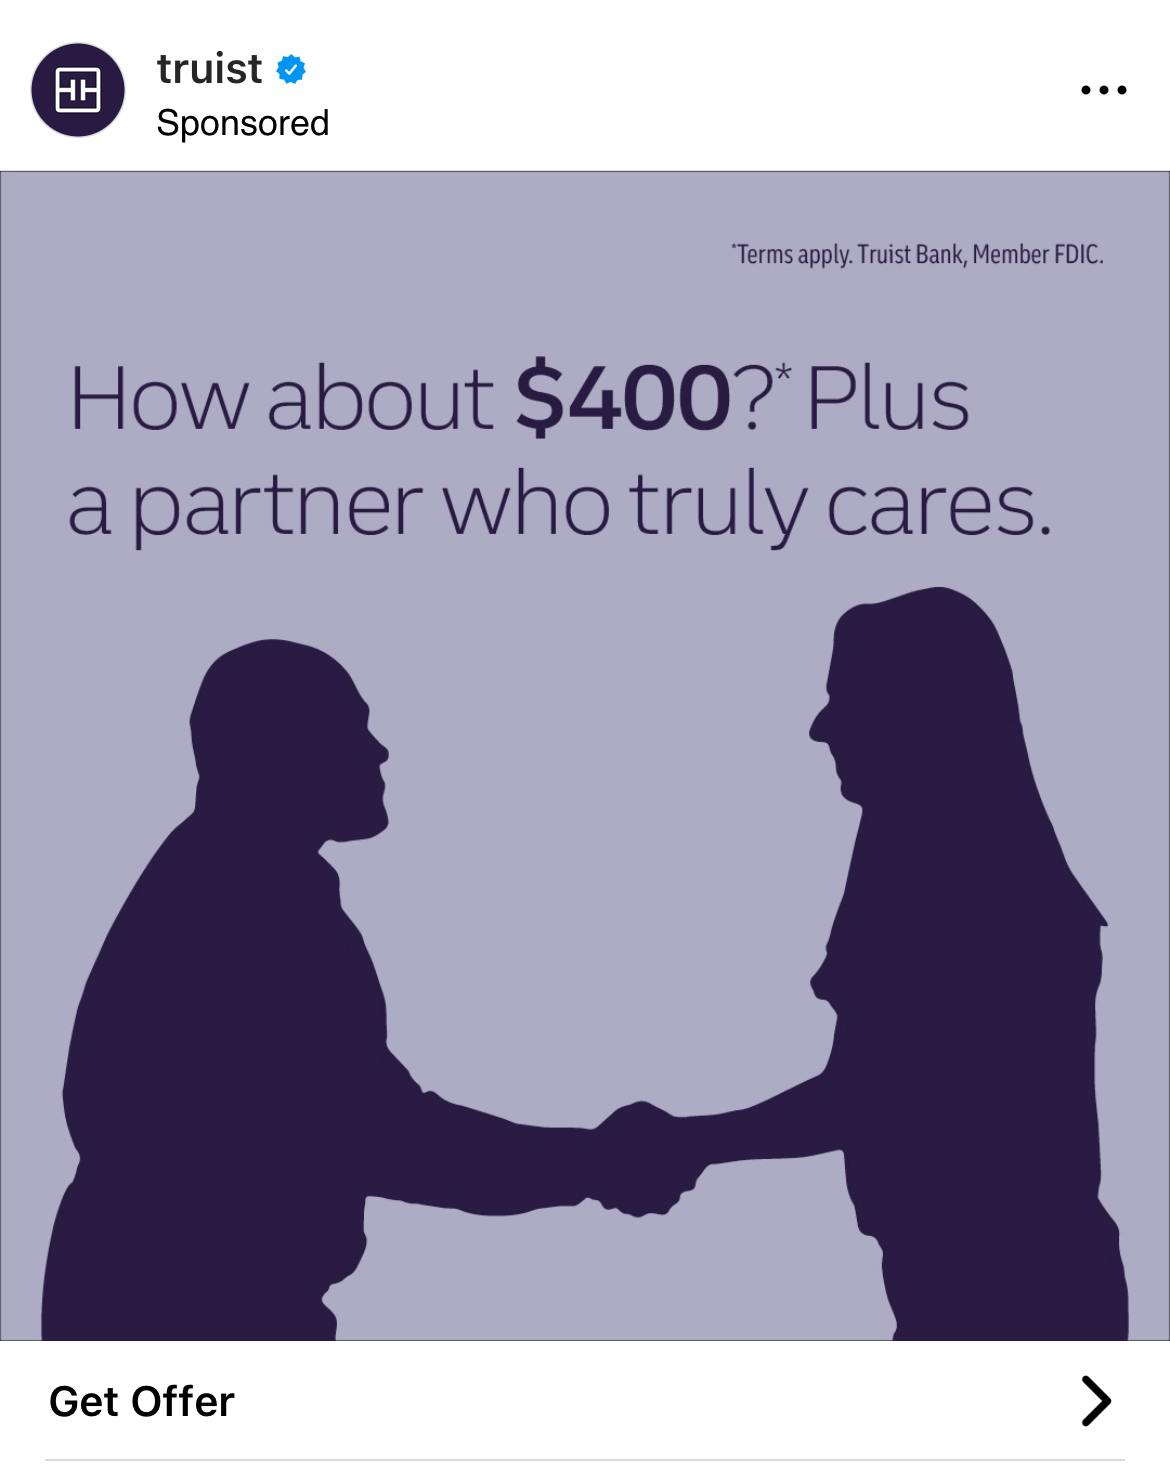 Two purple silhouettes on a light purple background, one with long hair one one that appears to be bald, shaking hands. The caption reads "How about $400?* Plus a partner who truly cares."